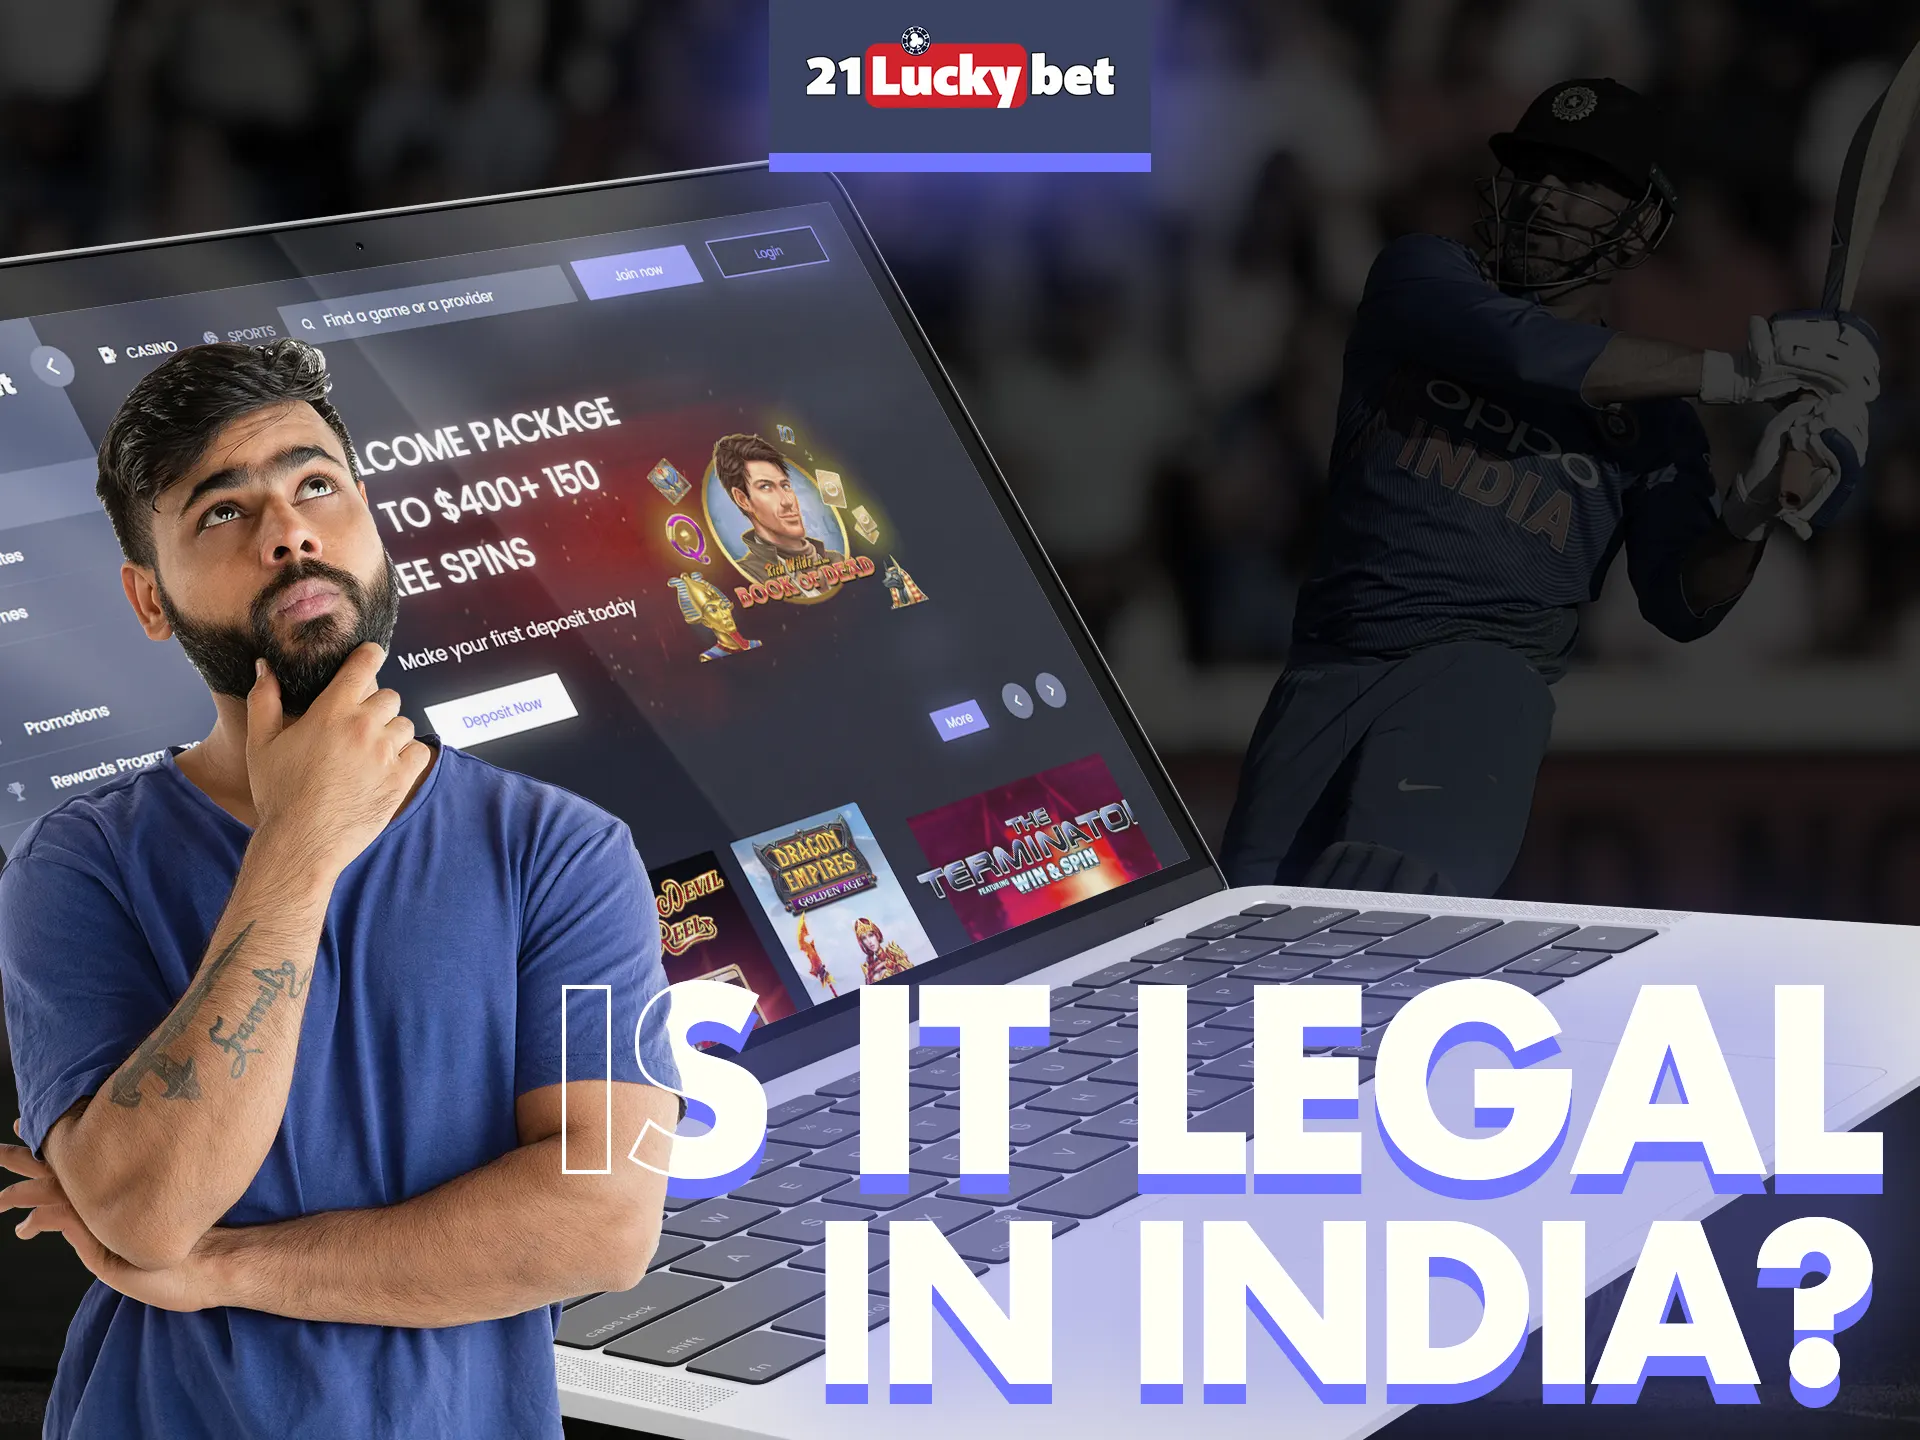 21lucky bet is legal betting in India.